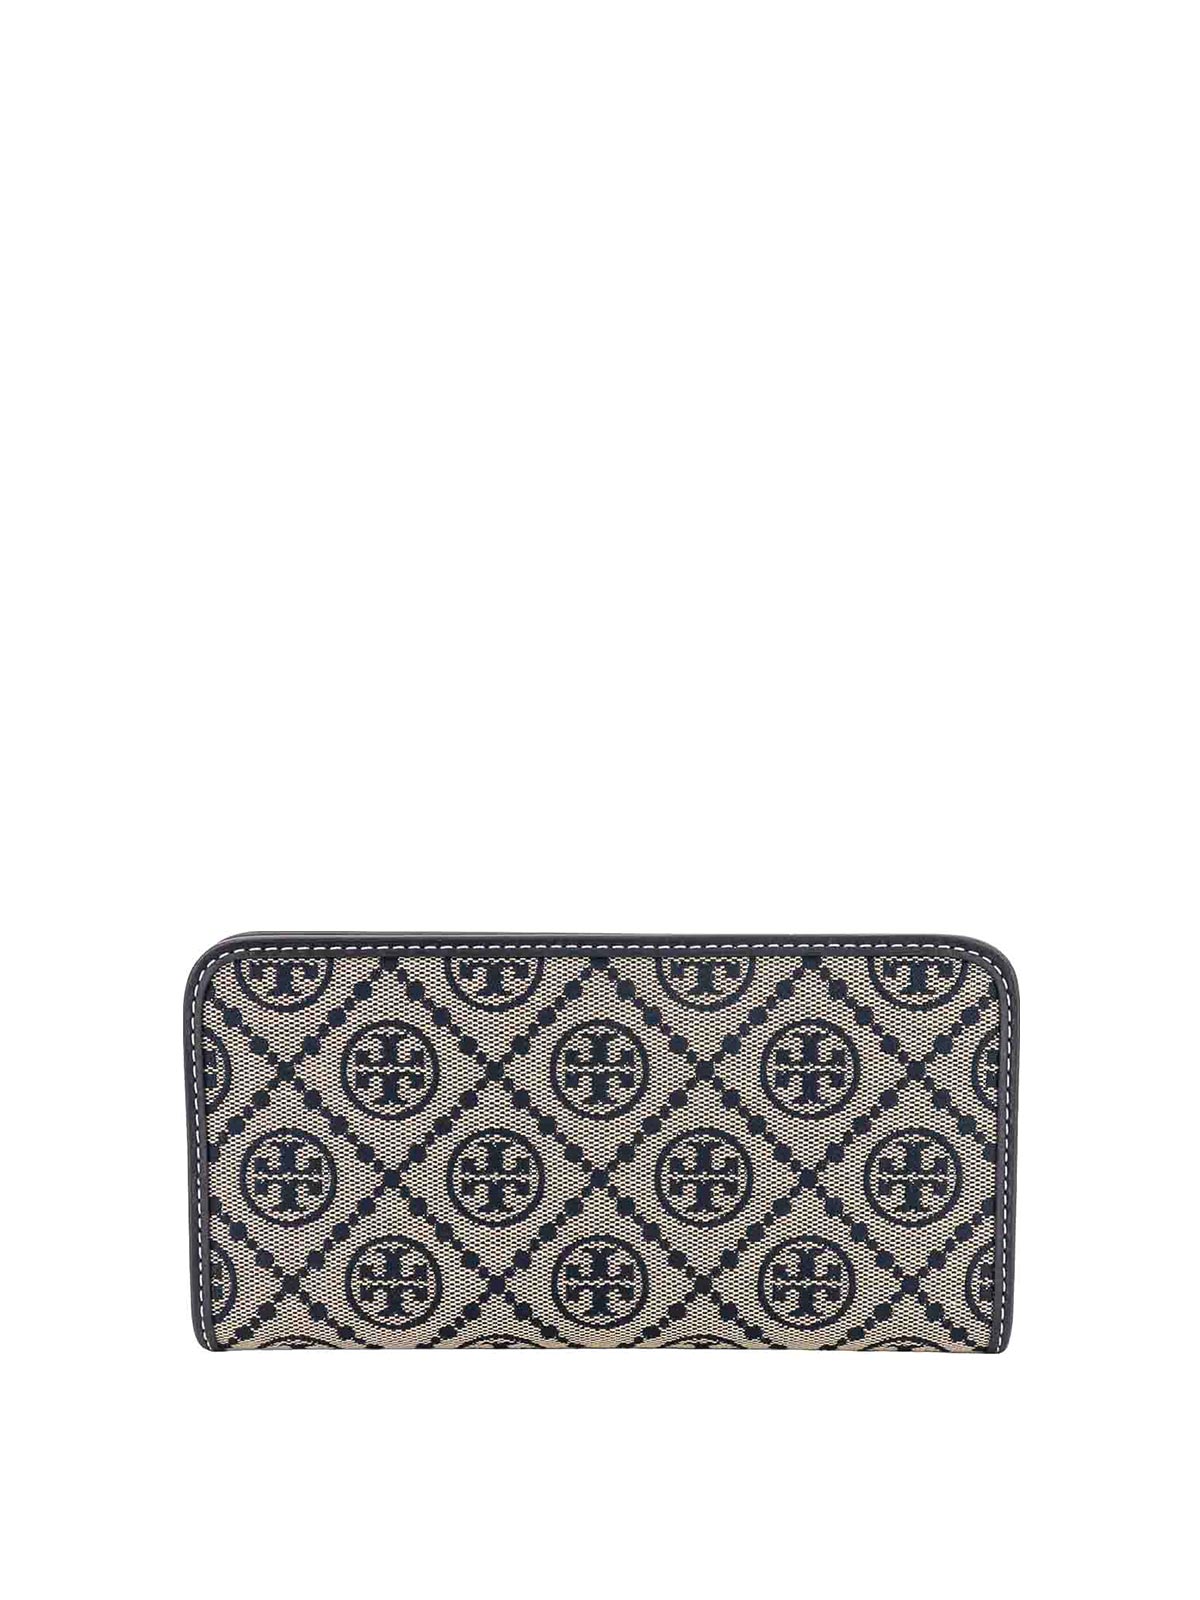 Tory Burch Canvas Wallet With T Monogram Motif In Blue